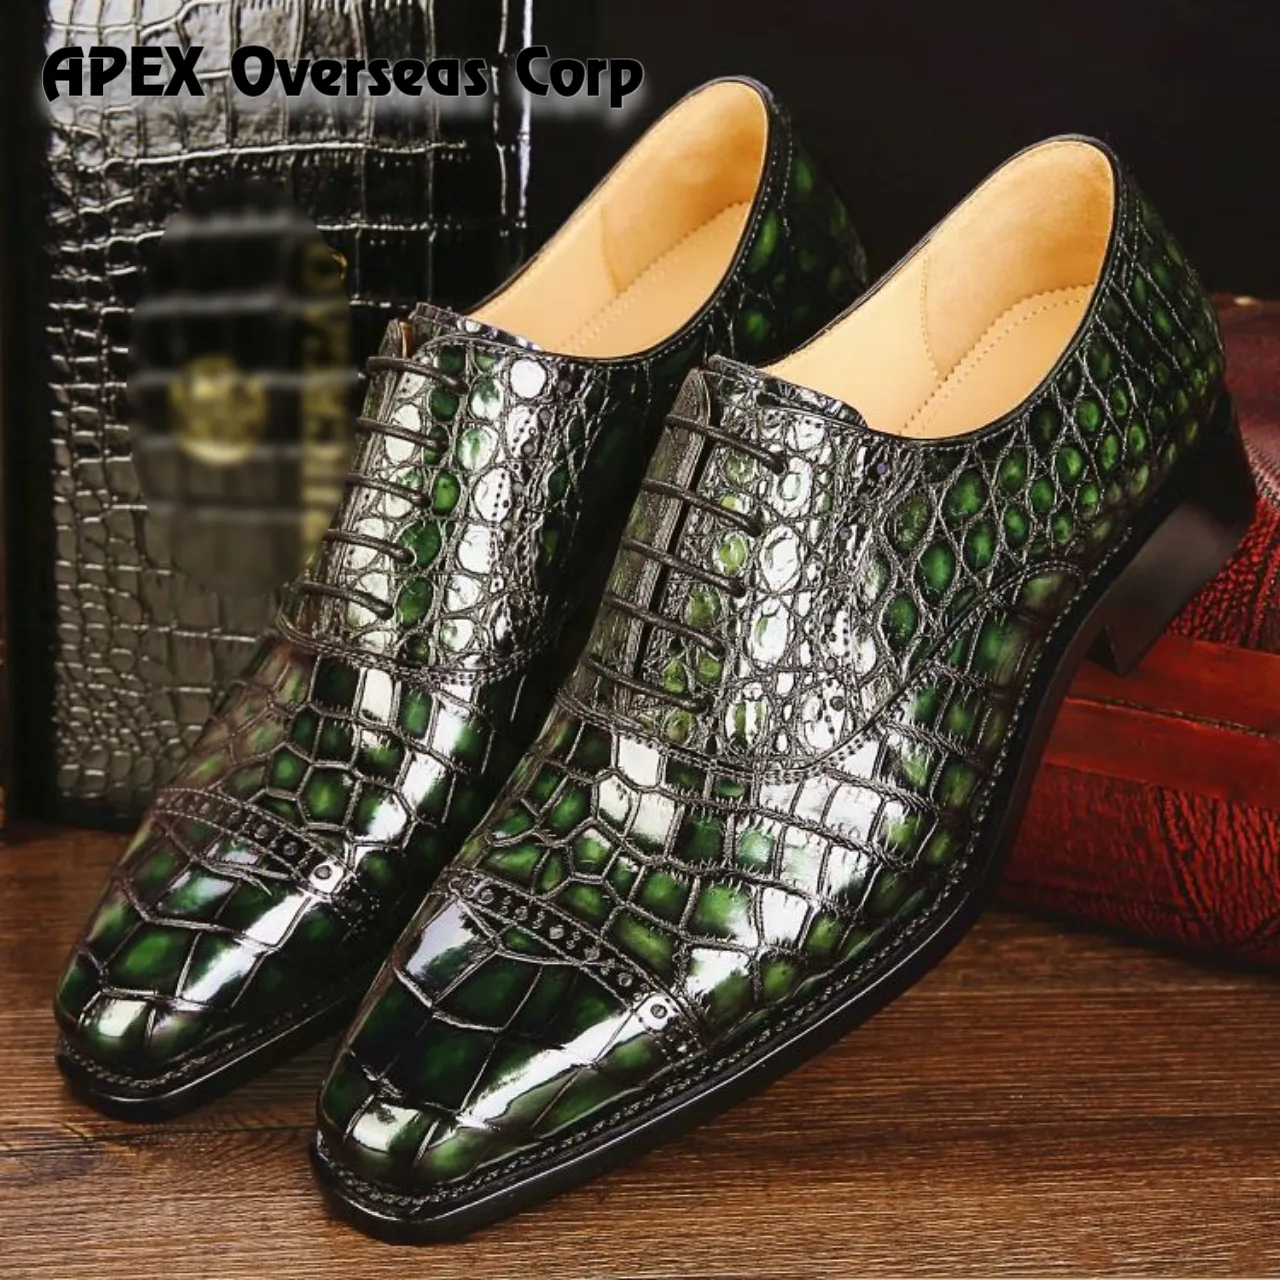 Mens Alligator Leather Cap toe Lace Up Oxford Dress Shoes Green Handmade Men Leather Dark Green Formal Oxford